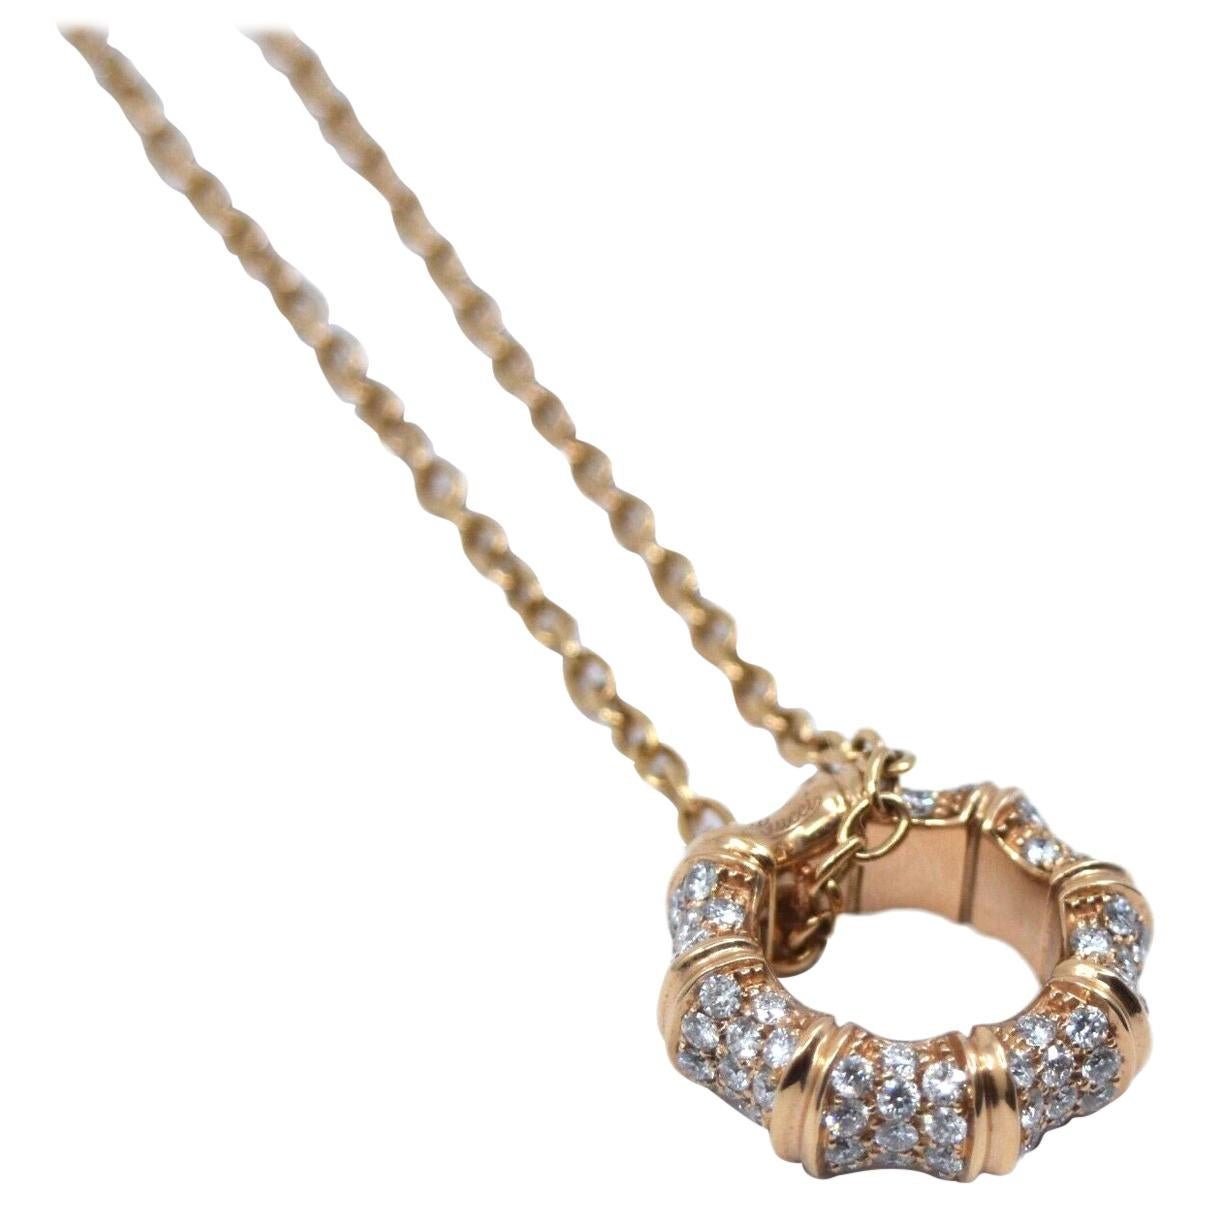 Gucci Bamboo in 18 Karat Rose Gold and Diamonds Necklace